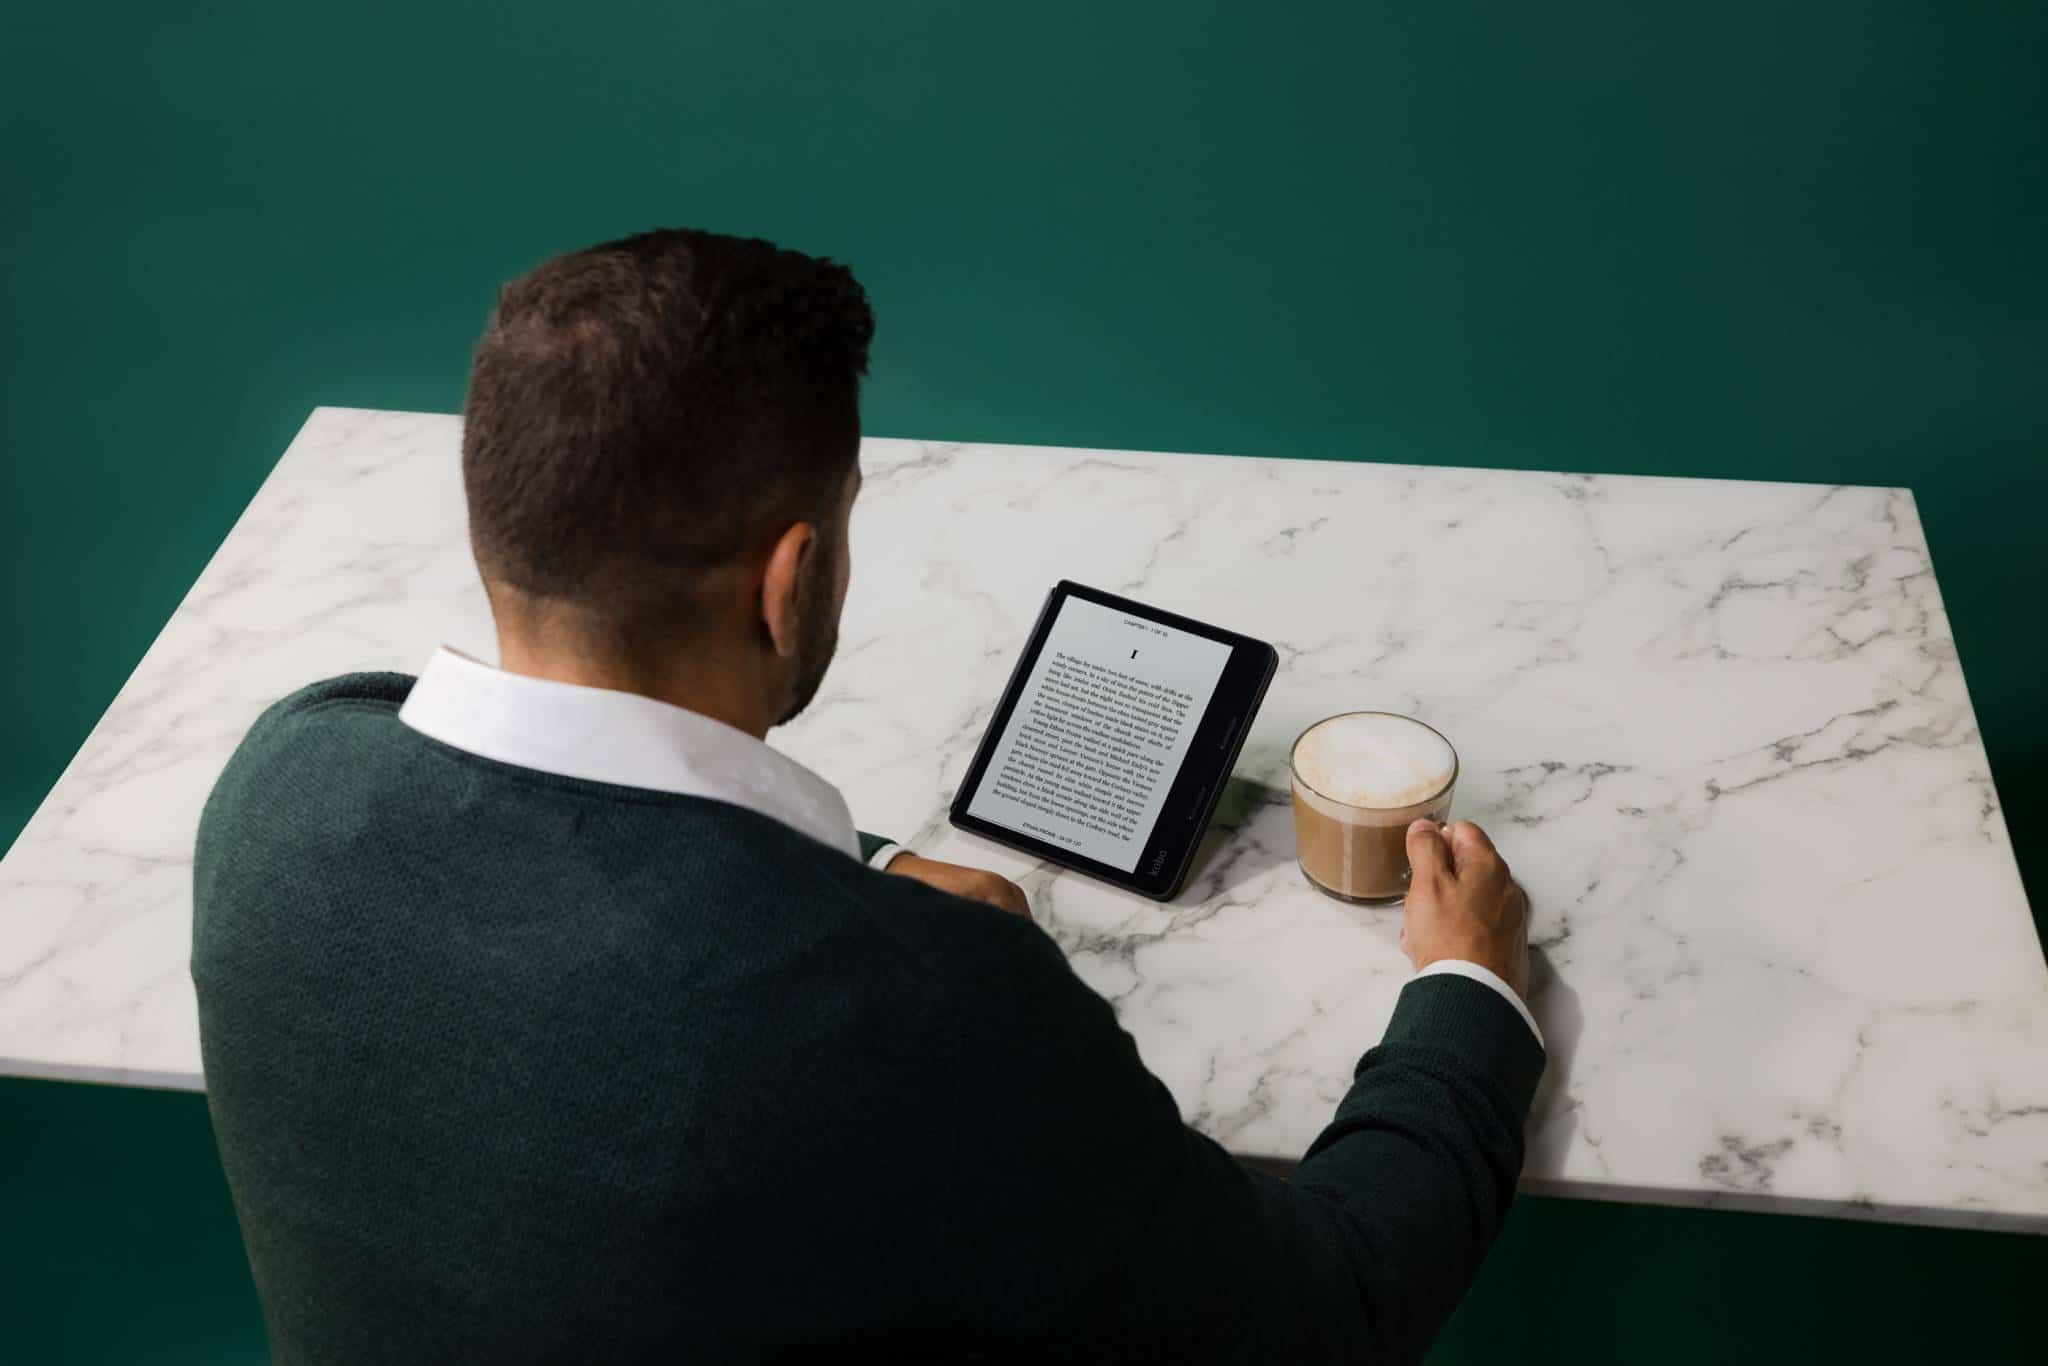 Kobo Sage is a 8 inch e-reader with a stylus and audiobook support